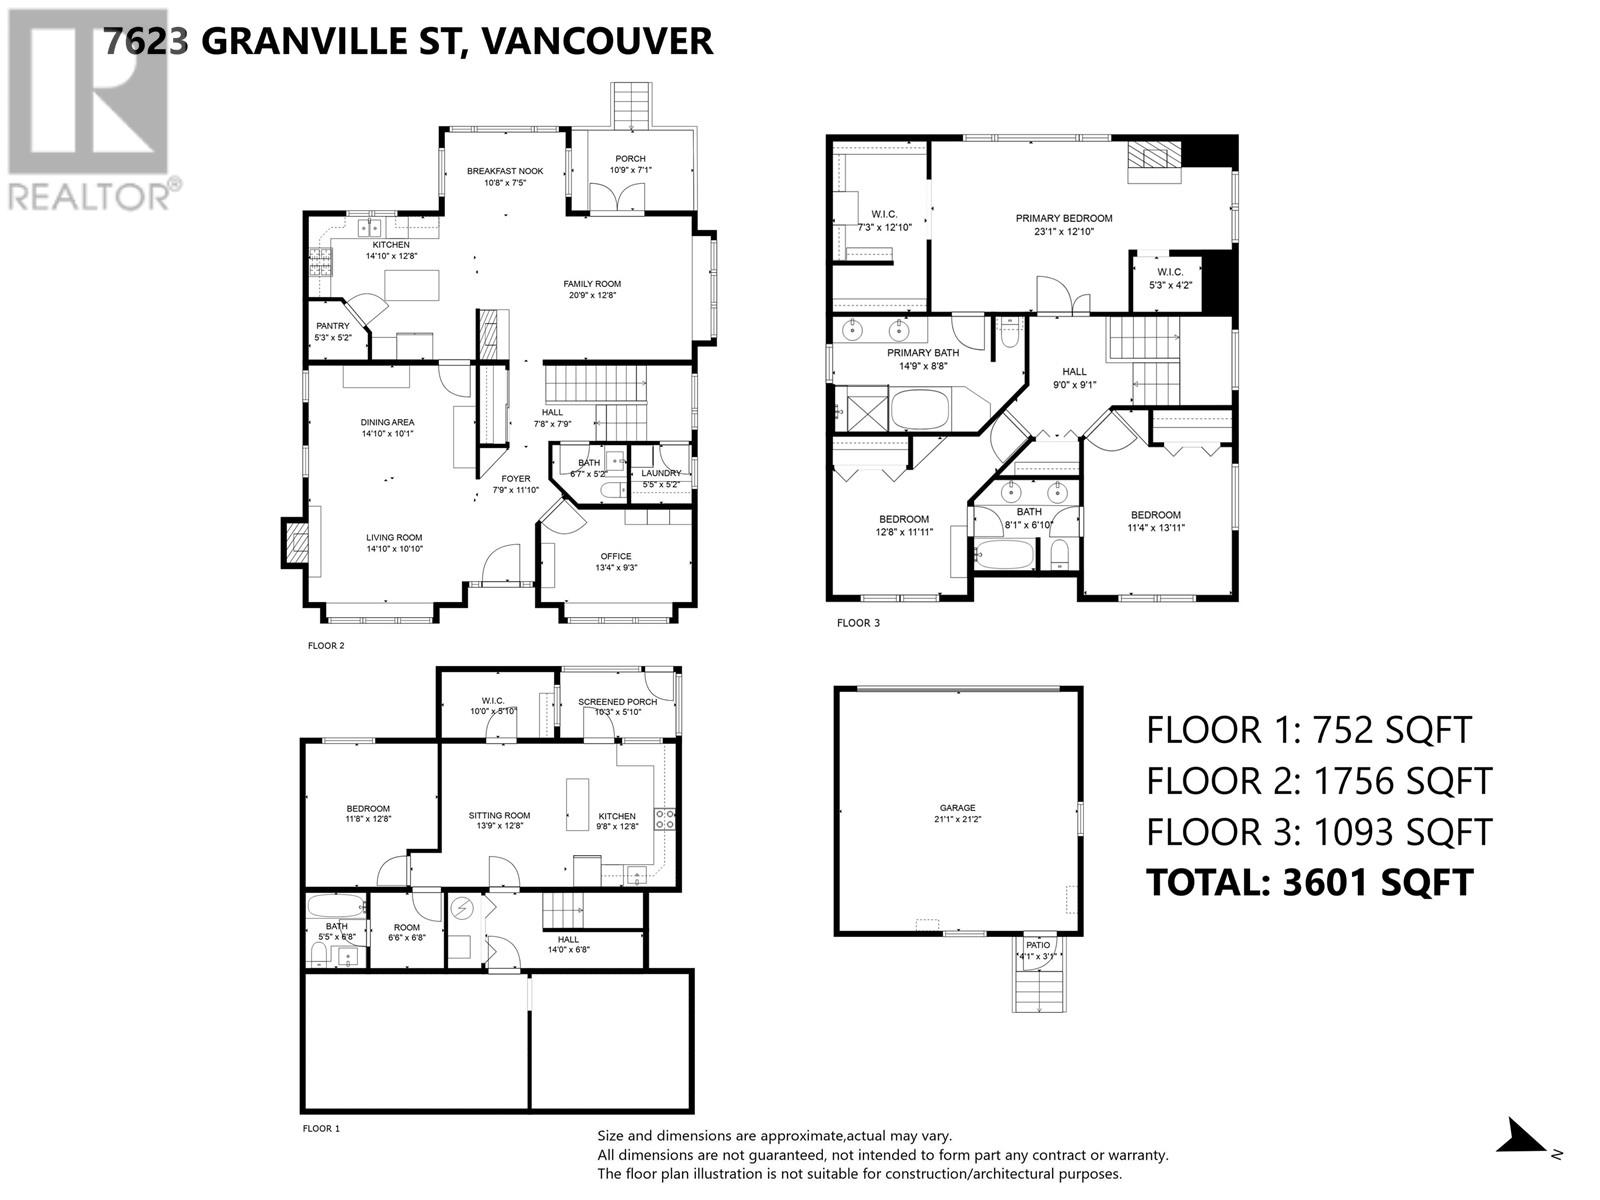 Listing Picture 2 of 2 : 7623 GRANVILLE STREET, Vancouver / 溫哥華 - 魯藝地產 Yvonne Lu Group - MLS Medallion Club Member